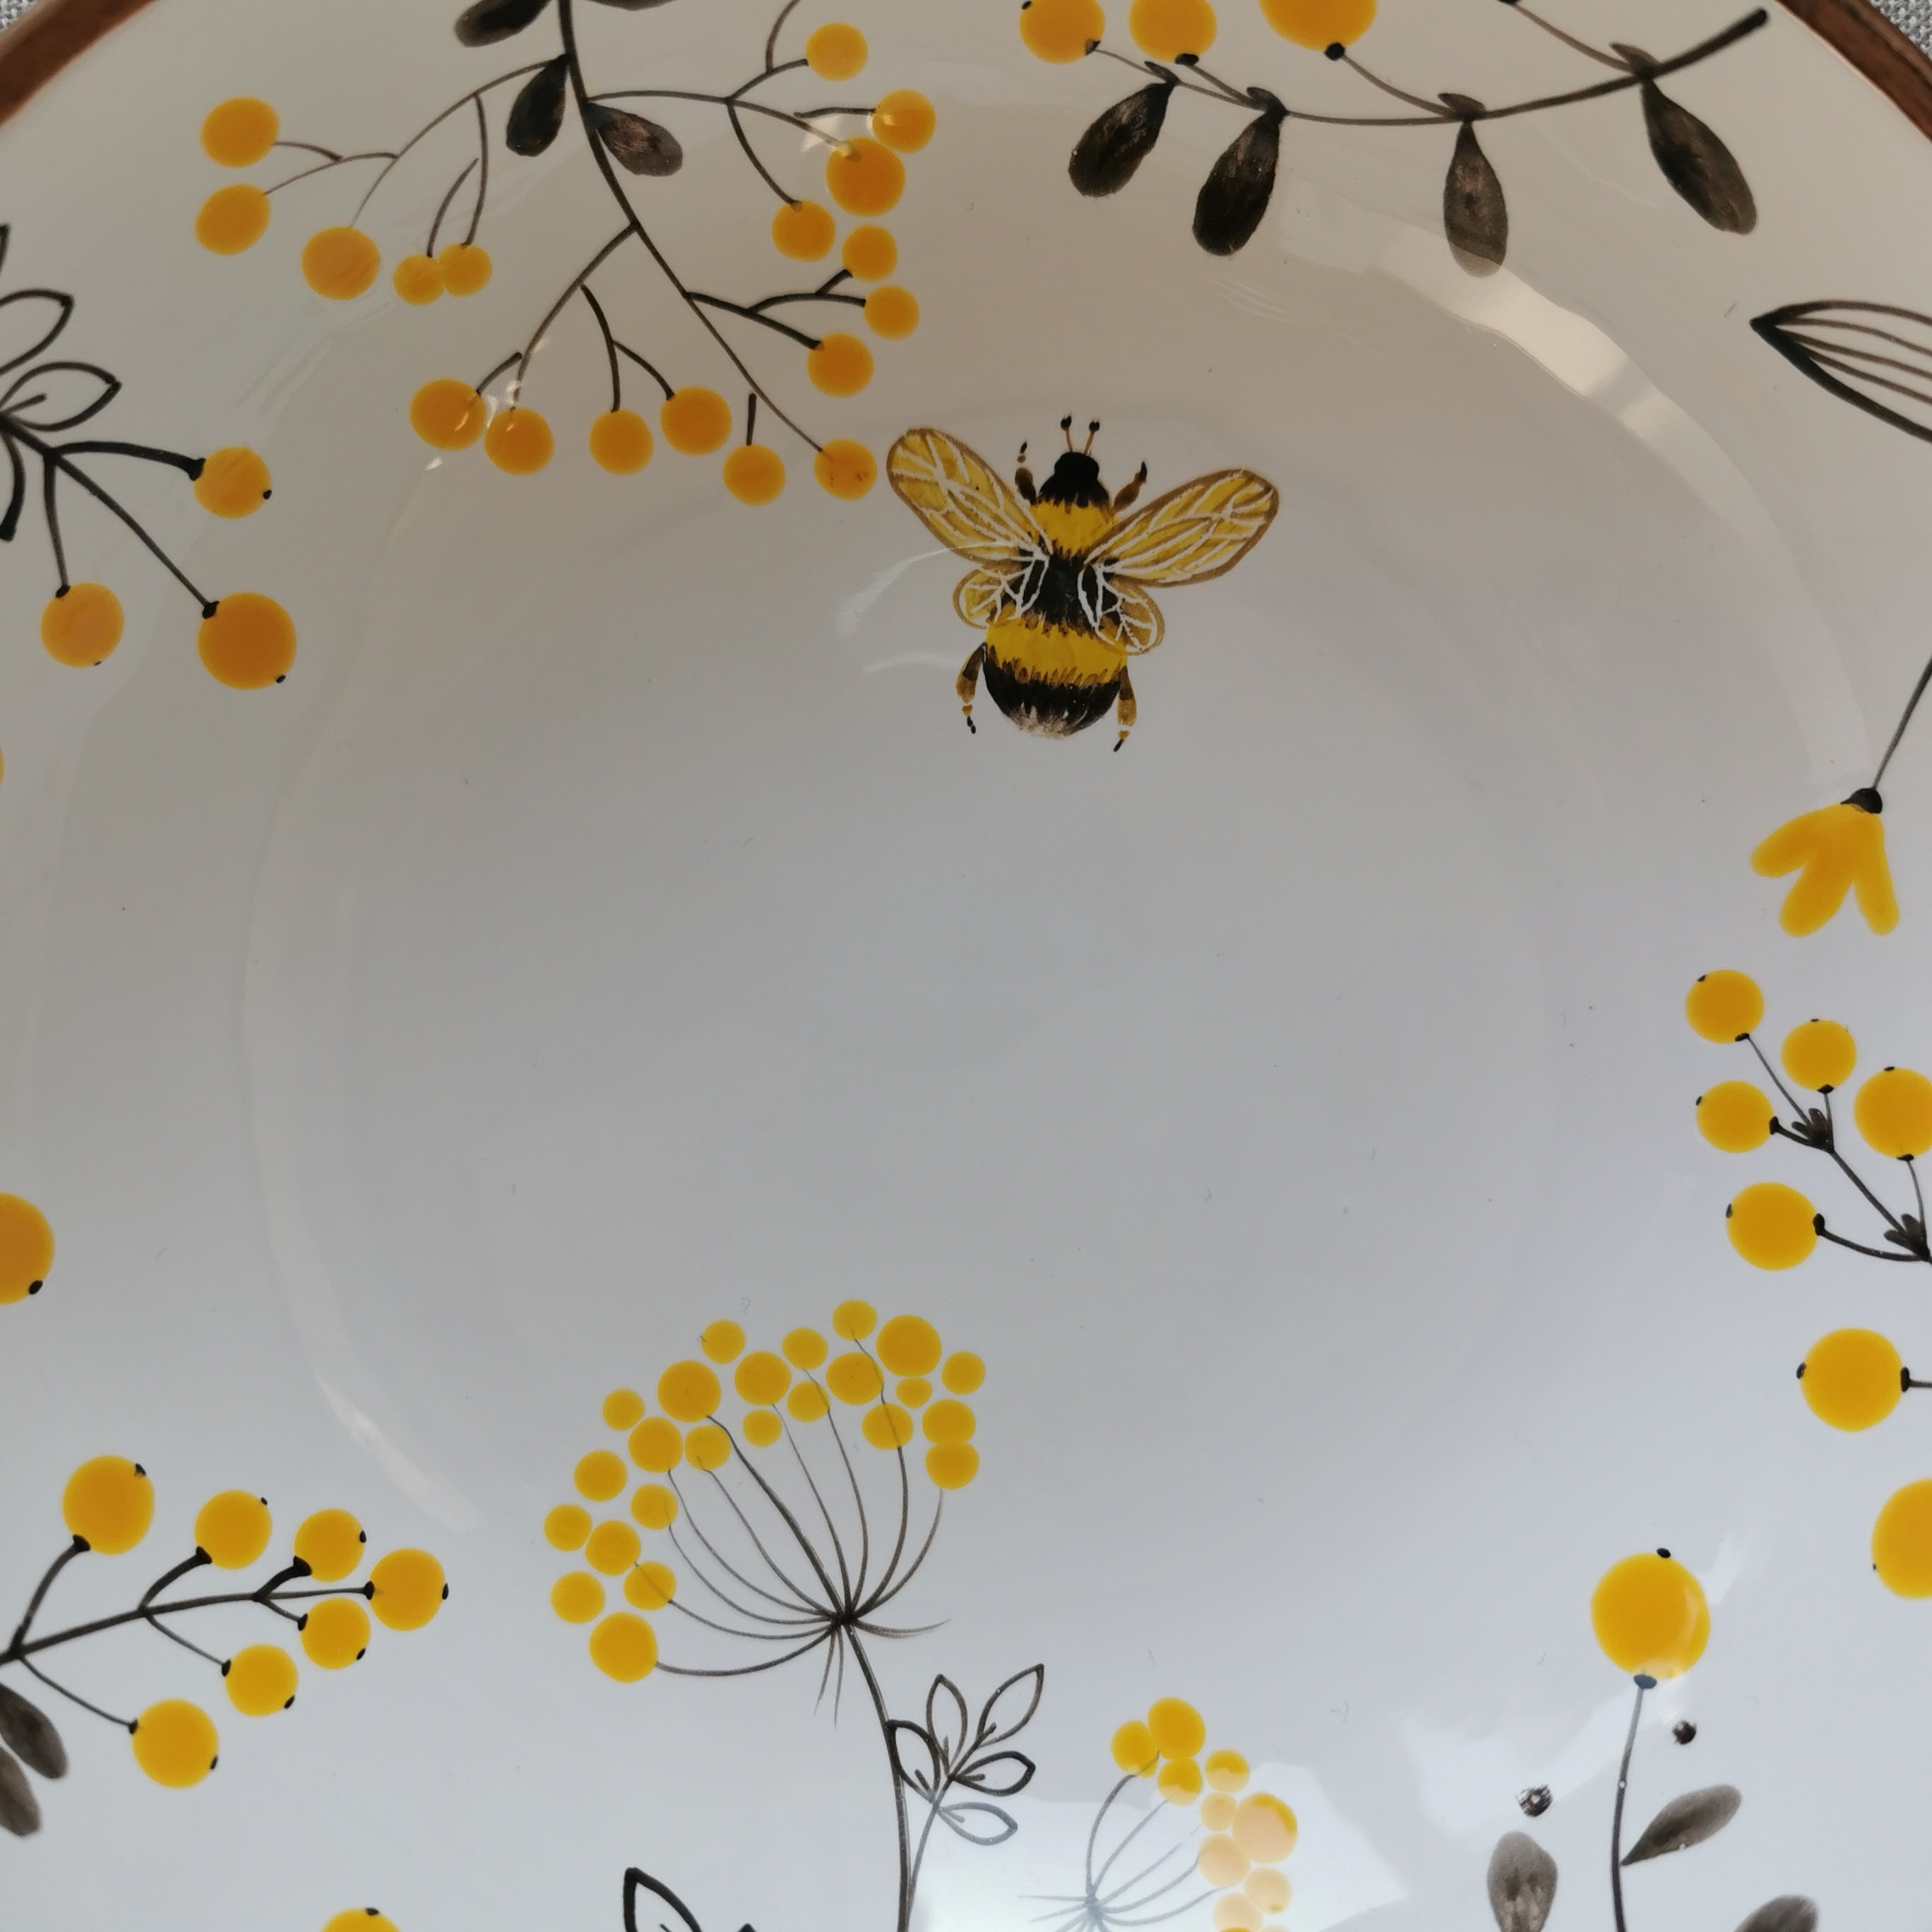 Handmade Ceramic Plate With a Bee, Pottery Dinnerware, Artisan Dishes,  Collectible Gift Plate Gift, Dinner Plate, Osoka Art Ceramics -  Denmark